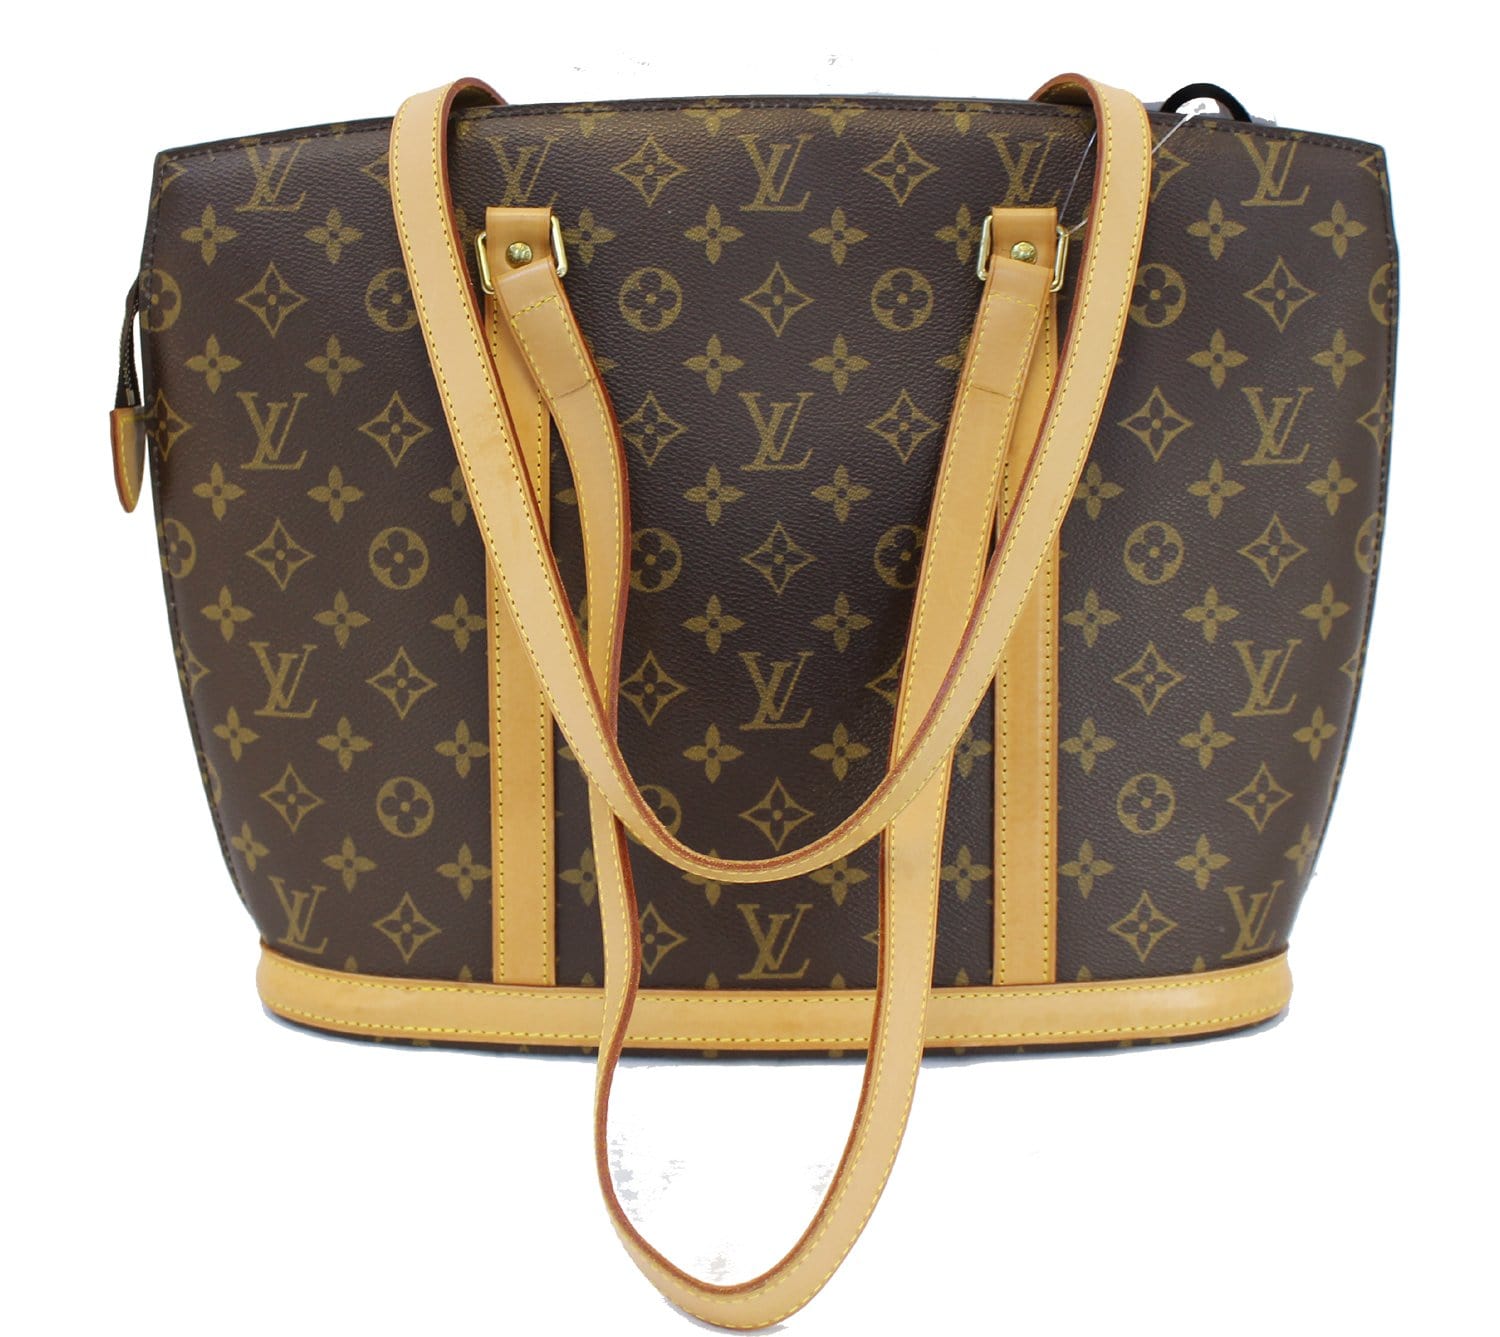 Louis Vuitton Monogram Babylon Tote Bag color brown used from japan TES23